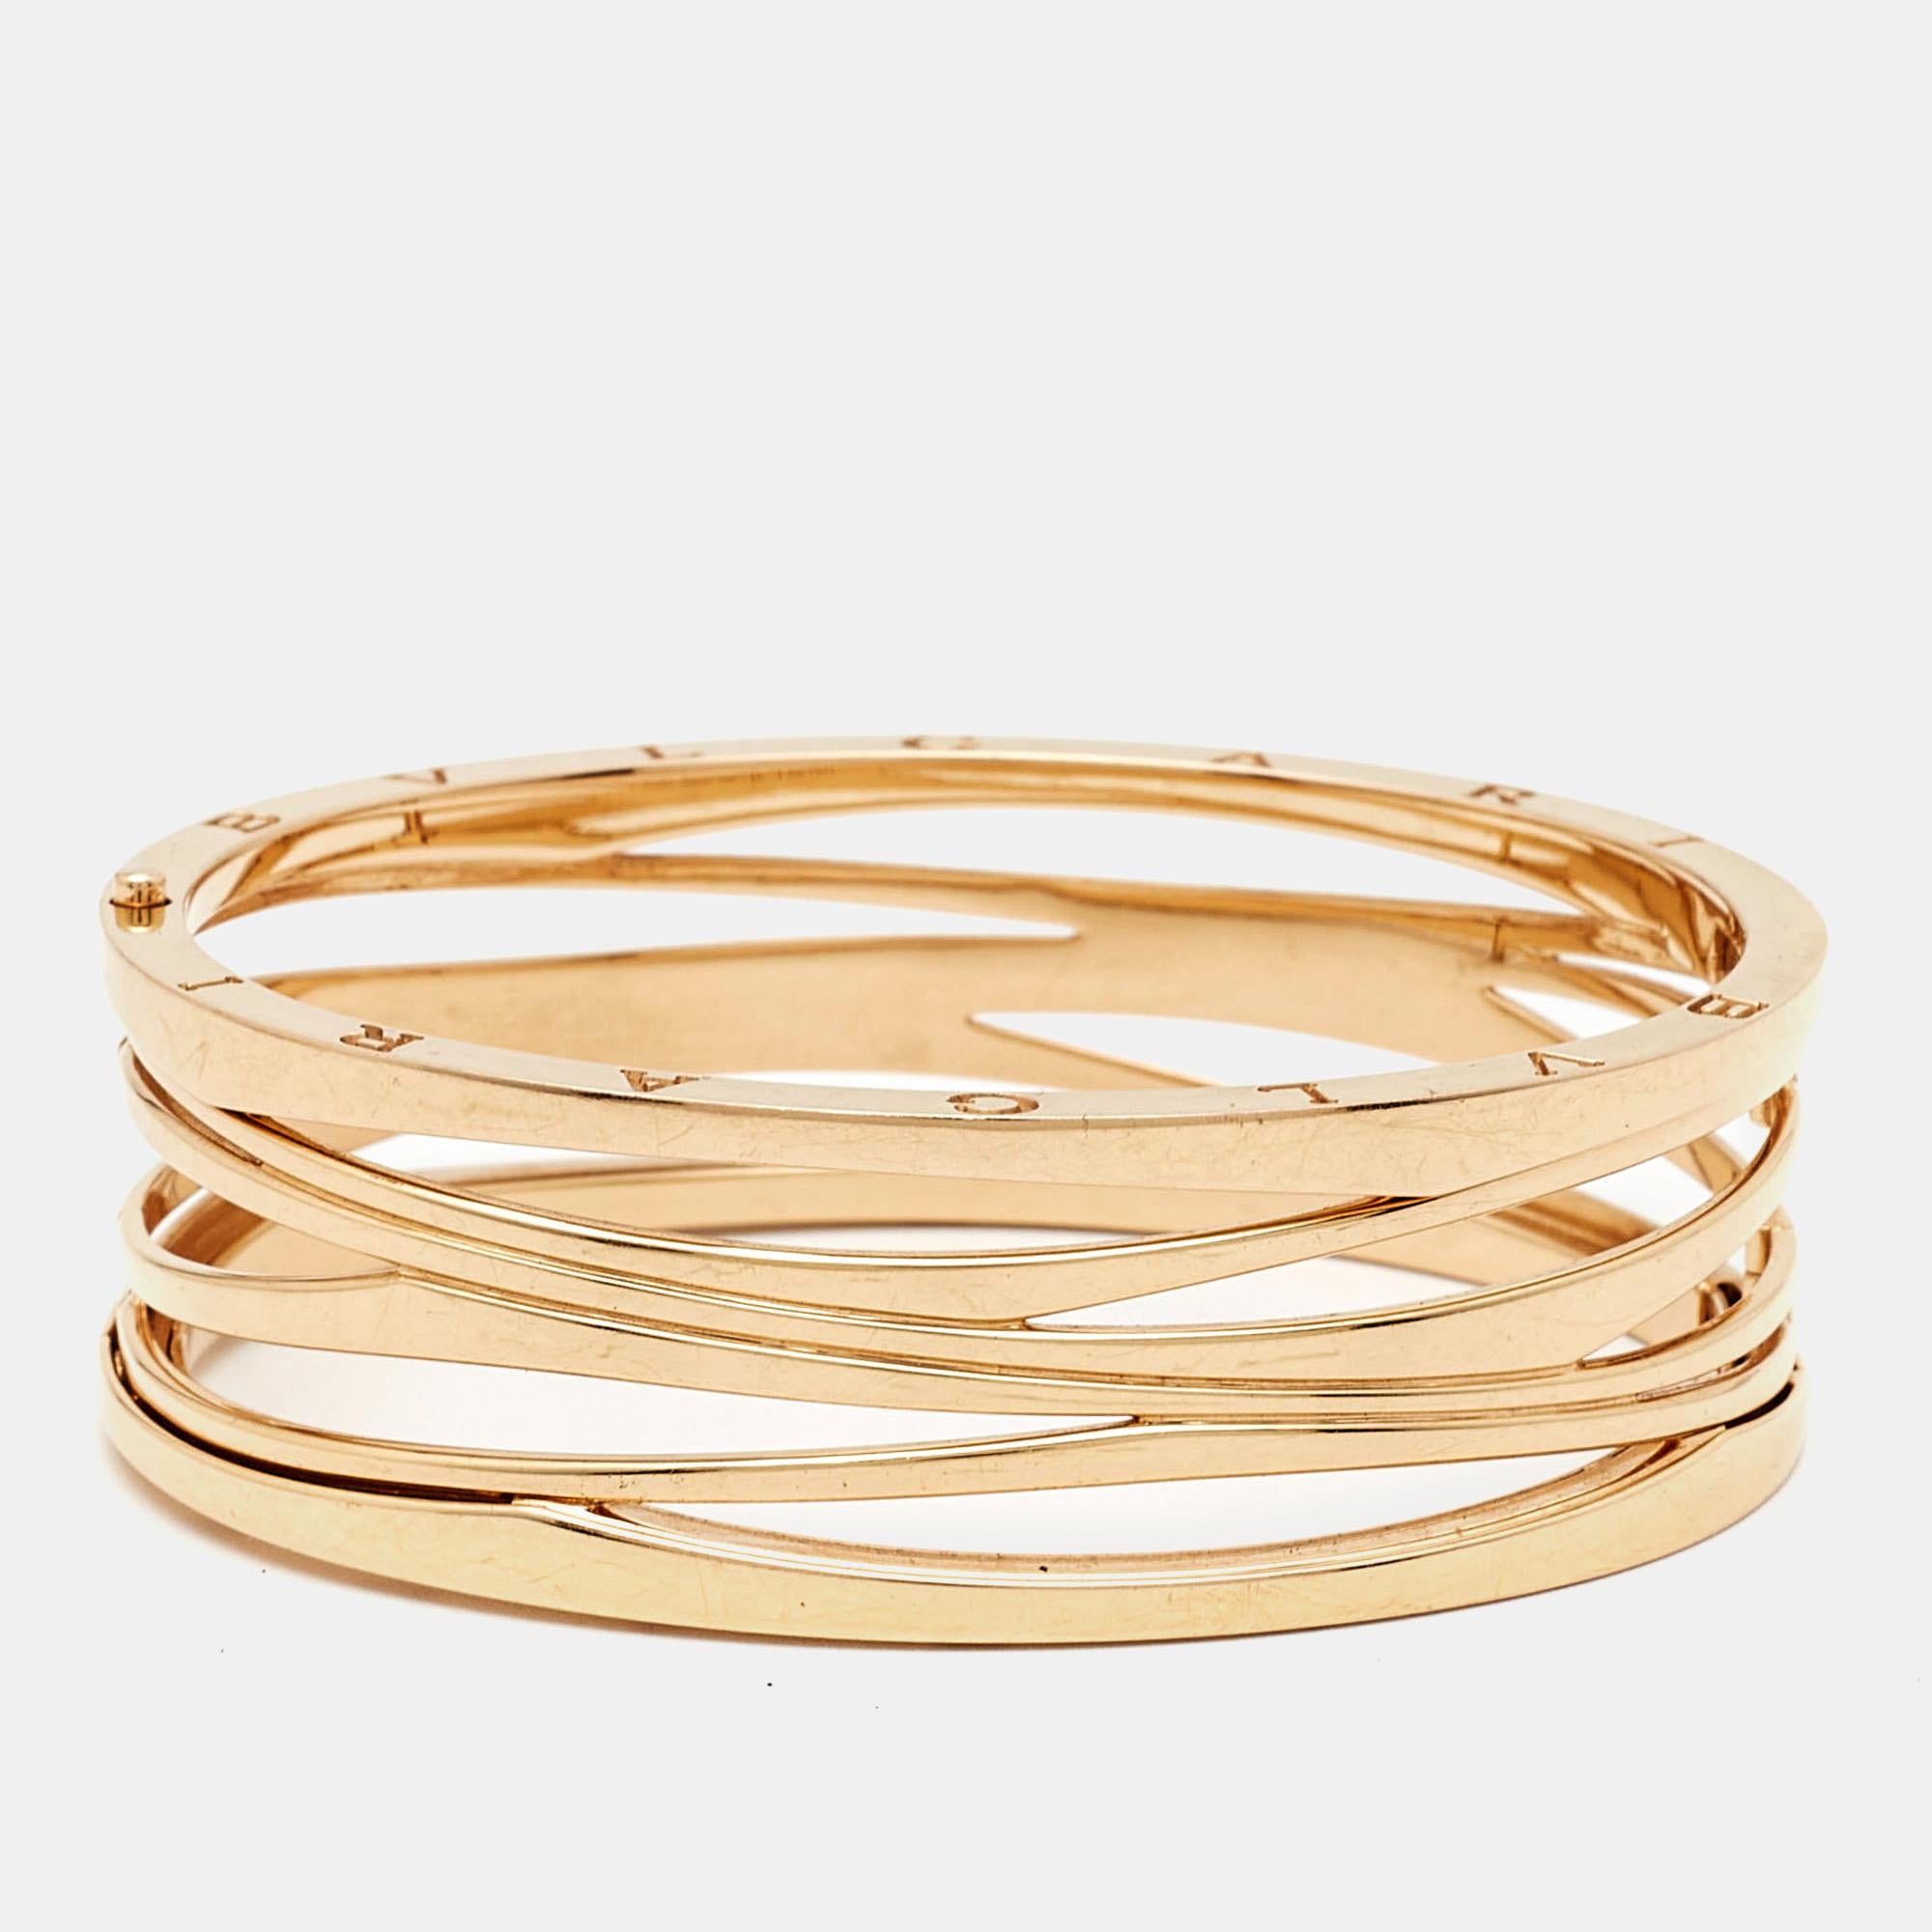 Crafted in lustrous 18k rose gold, the Bvlgari B.Zero1 wide bracelet exudes timeless charm. Its sleek design features the iconic spiral motif, symbolizing eternal beauty and strength. With a luxurious blend of craftsmanship and style, this piece